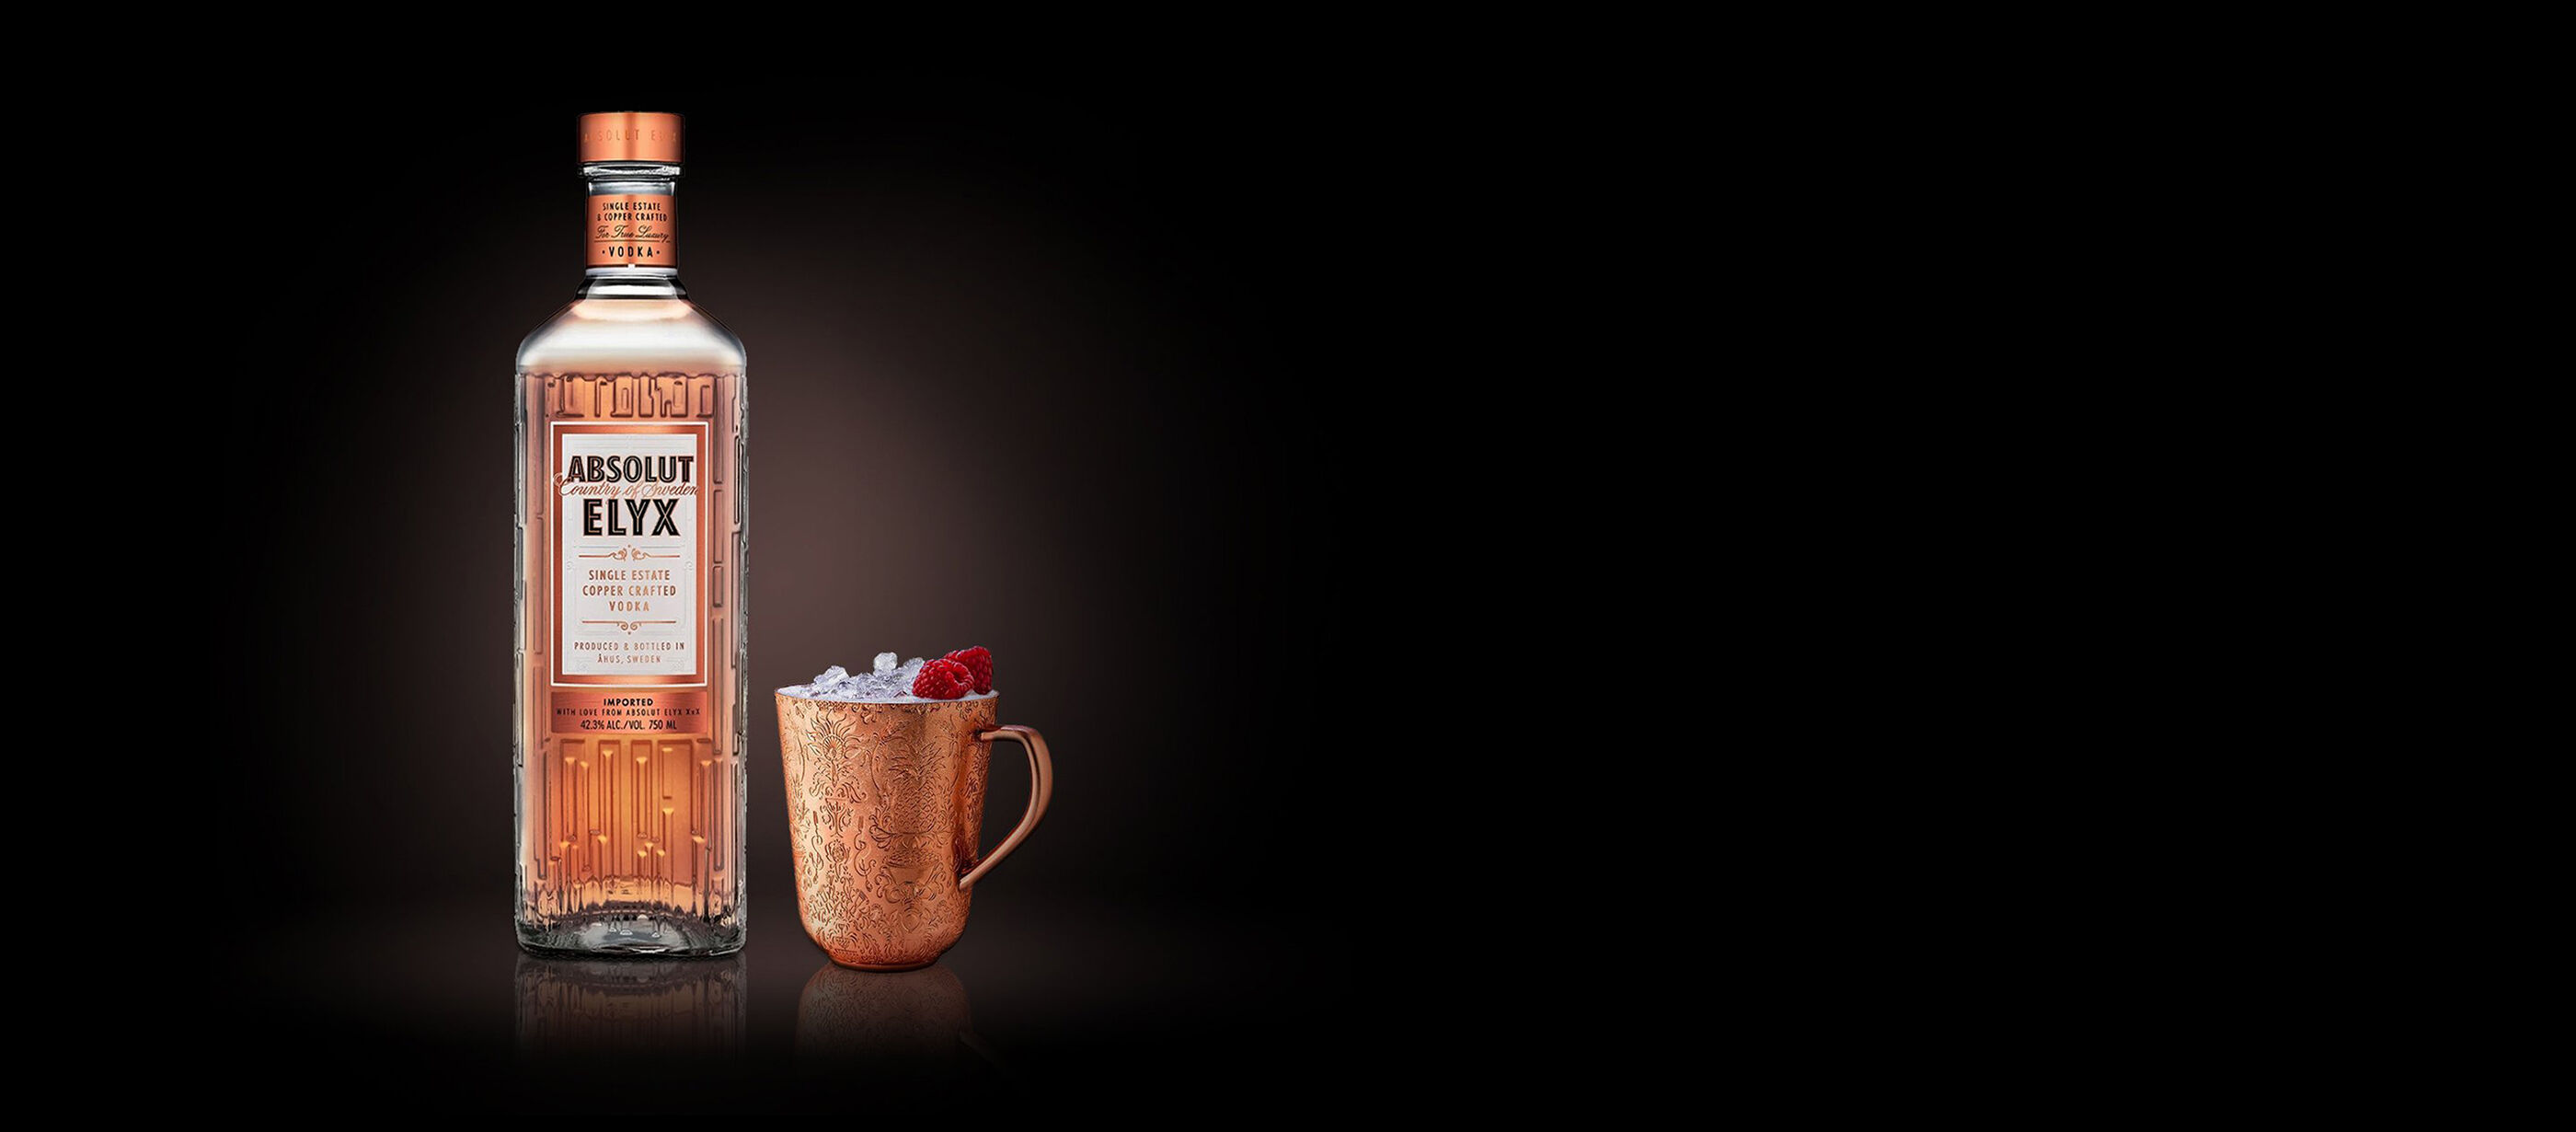 The Absolut Elyx Raspberry Mule Cocktail